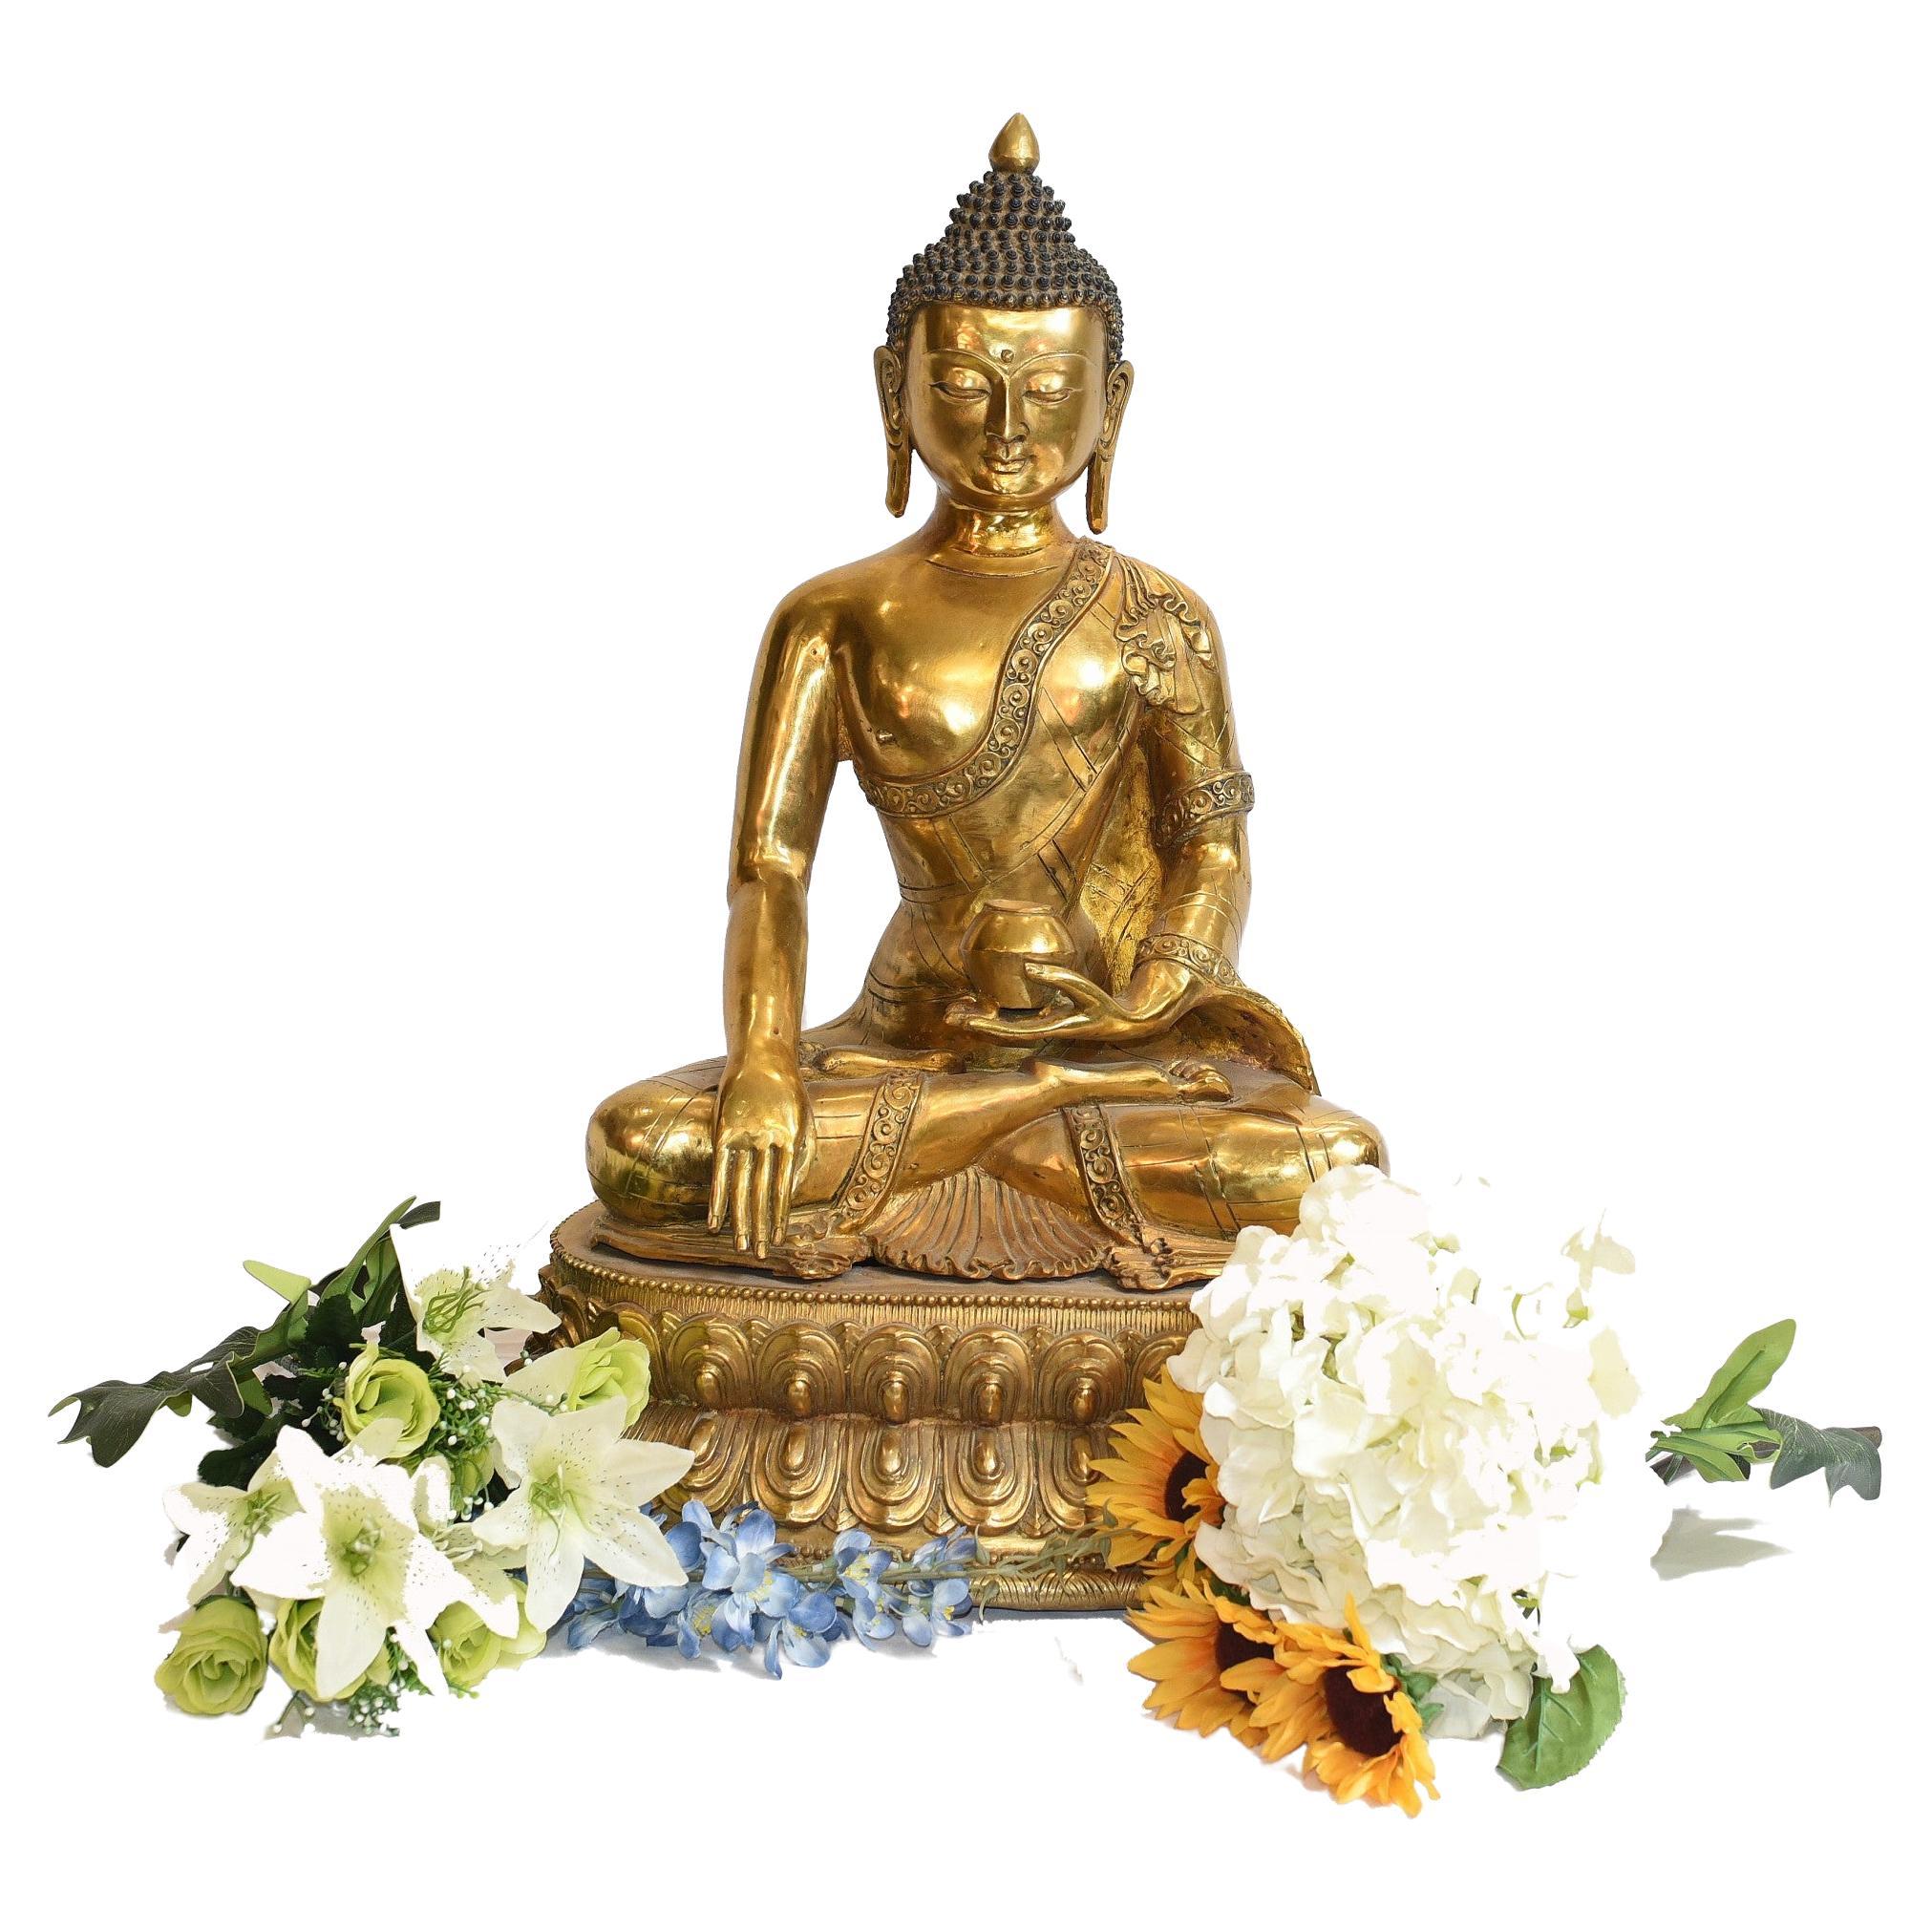 Nepalese Buddha Statue Meditation Casting Lotus Throne Sculpture For Sale